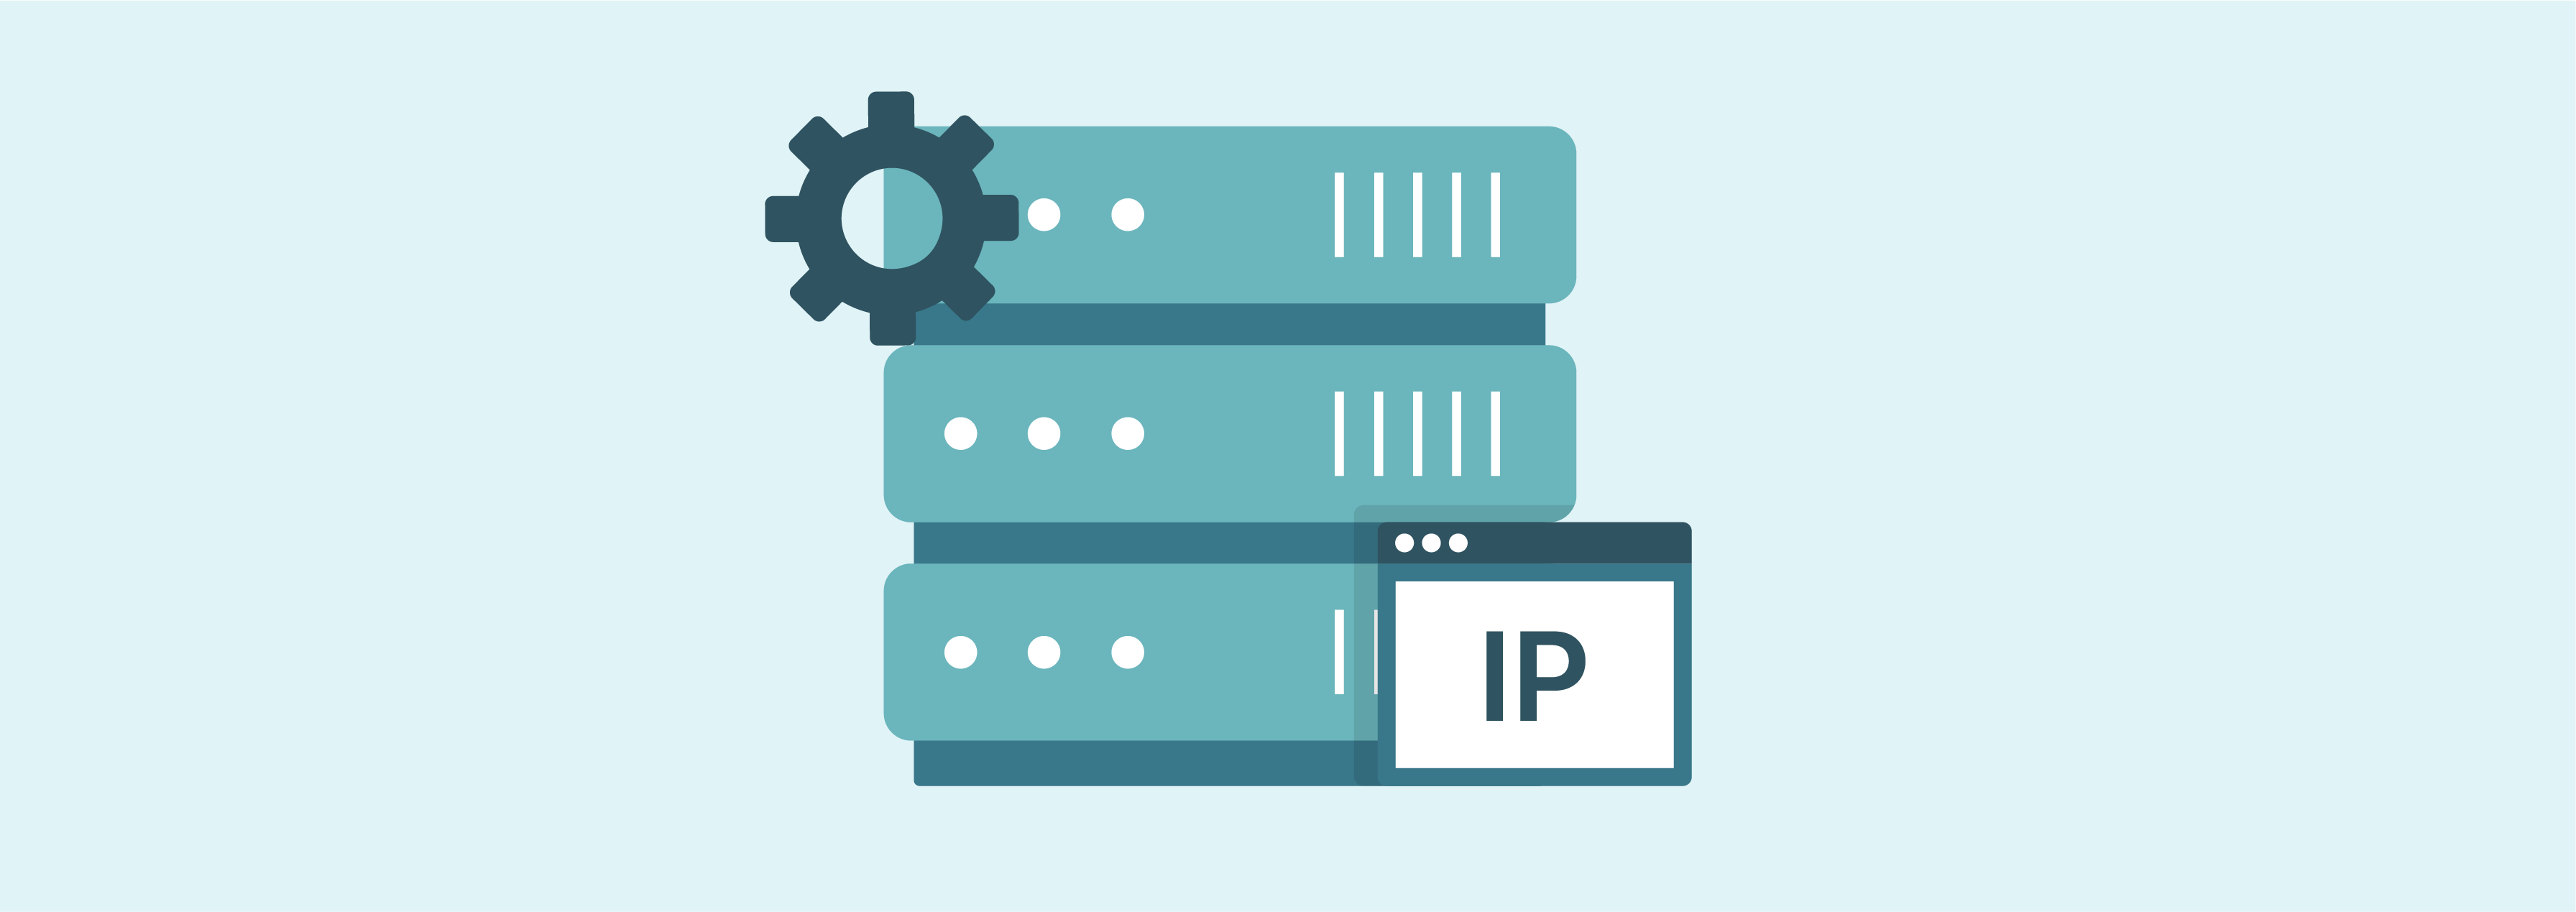 Guide to configuring server and IP settings for Magento 2 email deliverability.